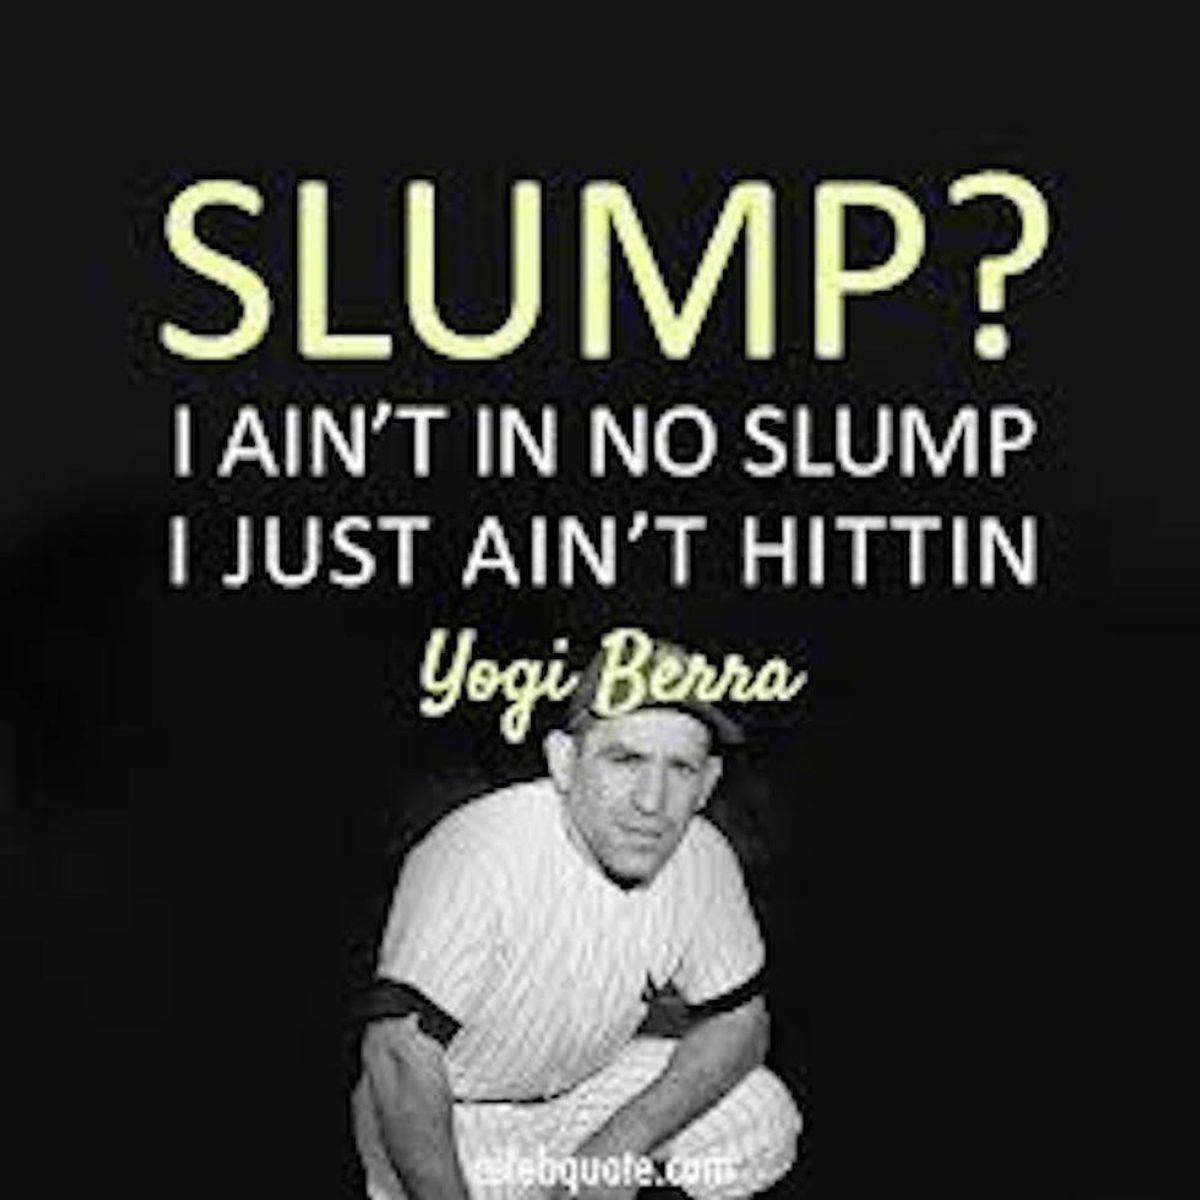 DON'T GET CAUGHT IN A SLUMP